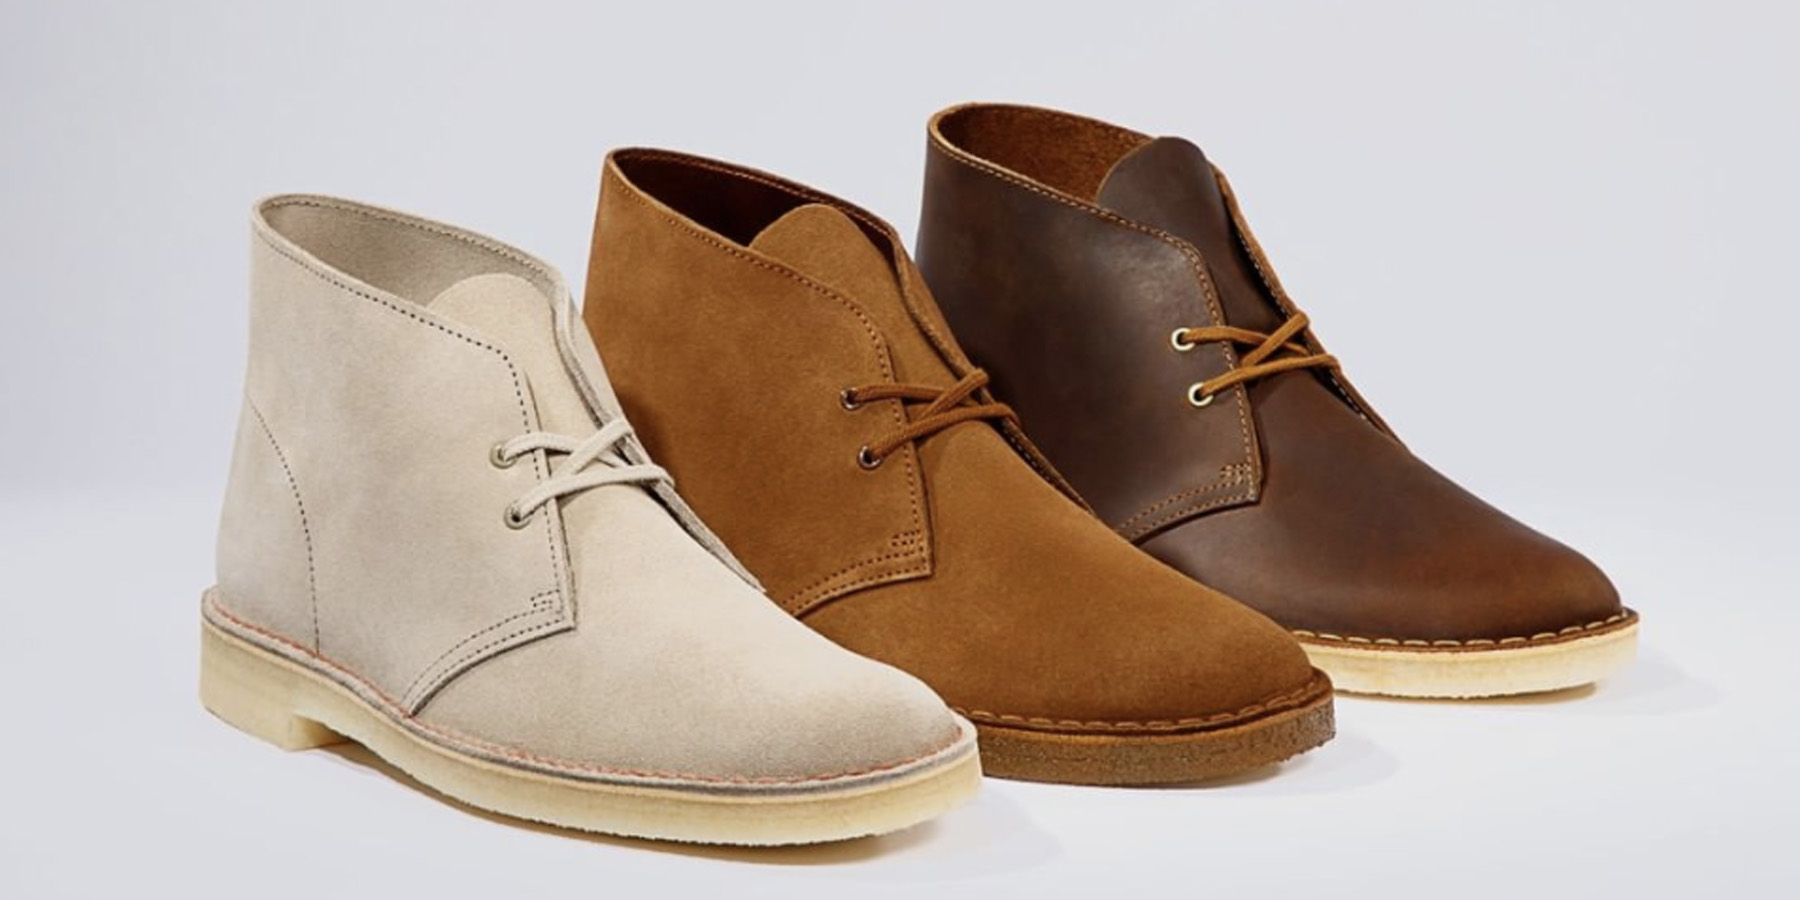 clarks free shipping